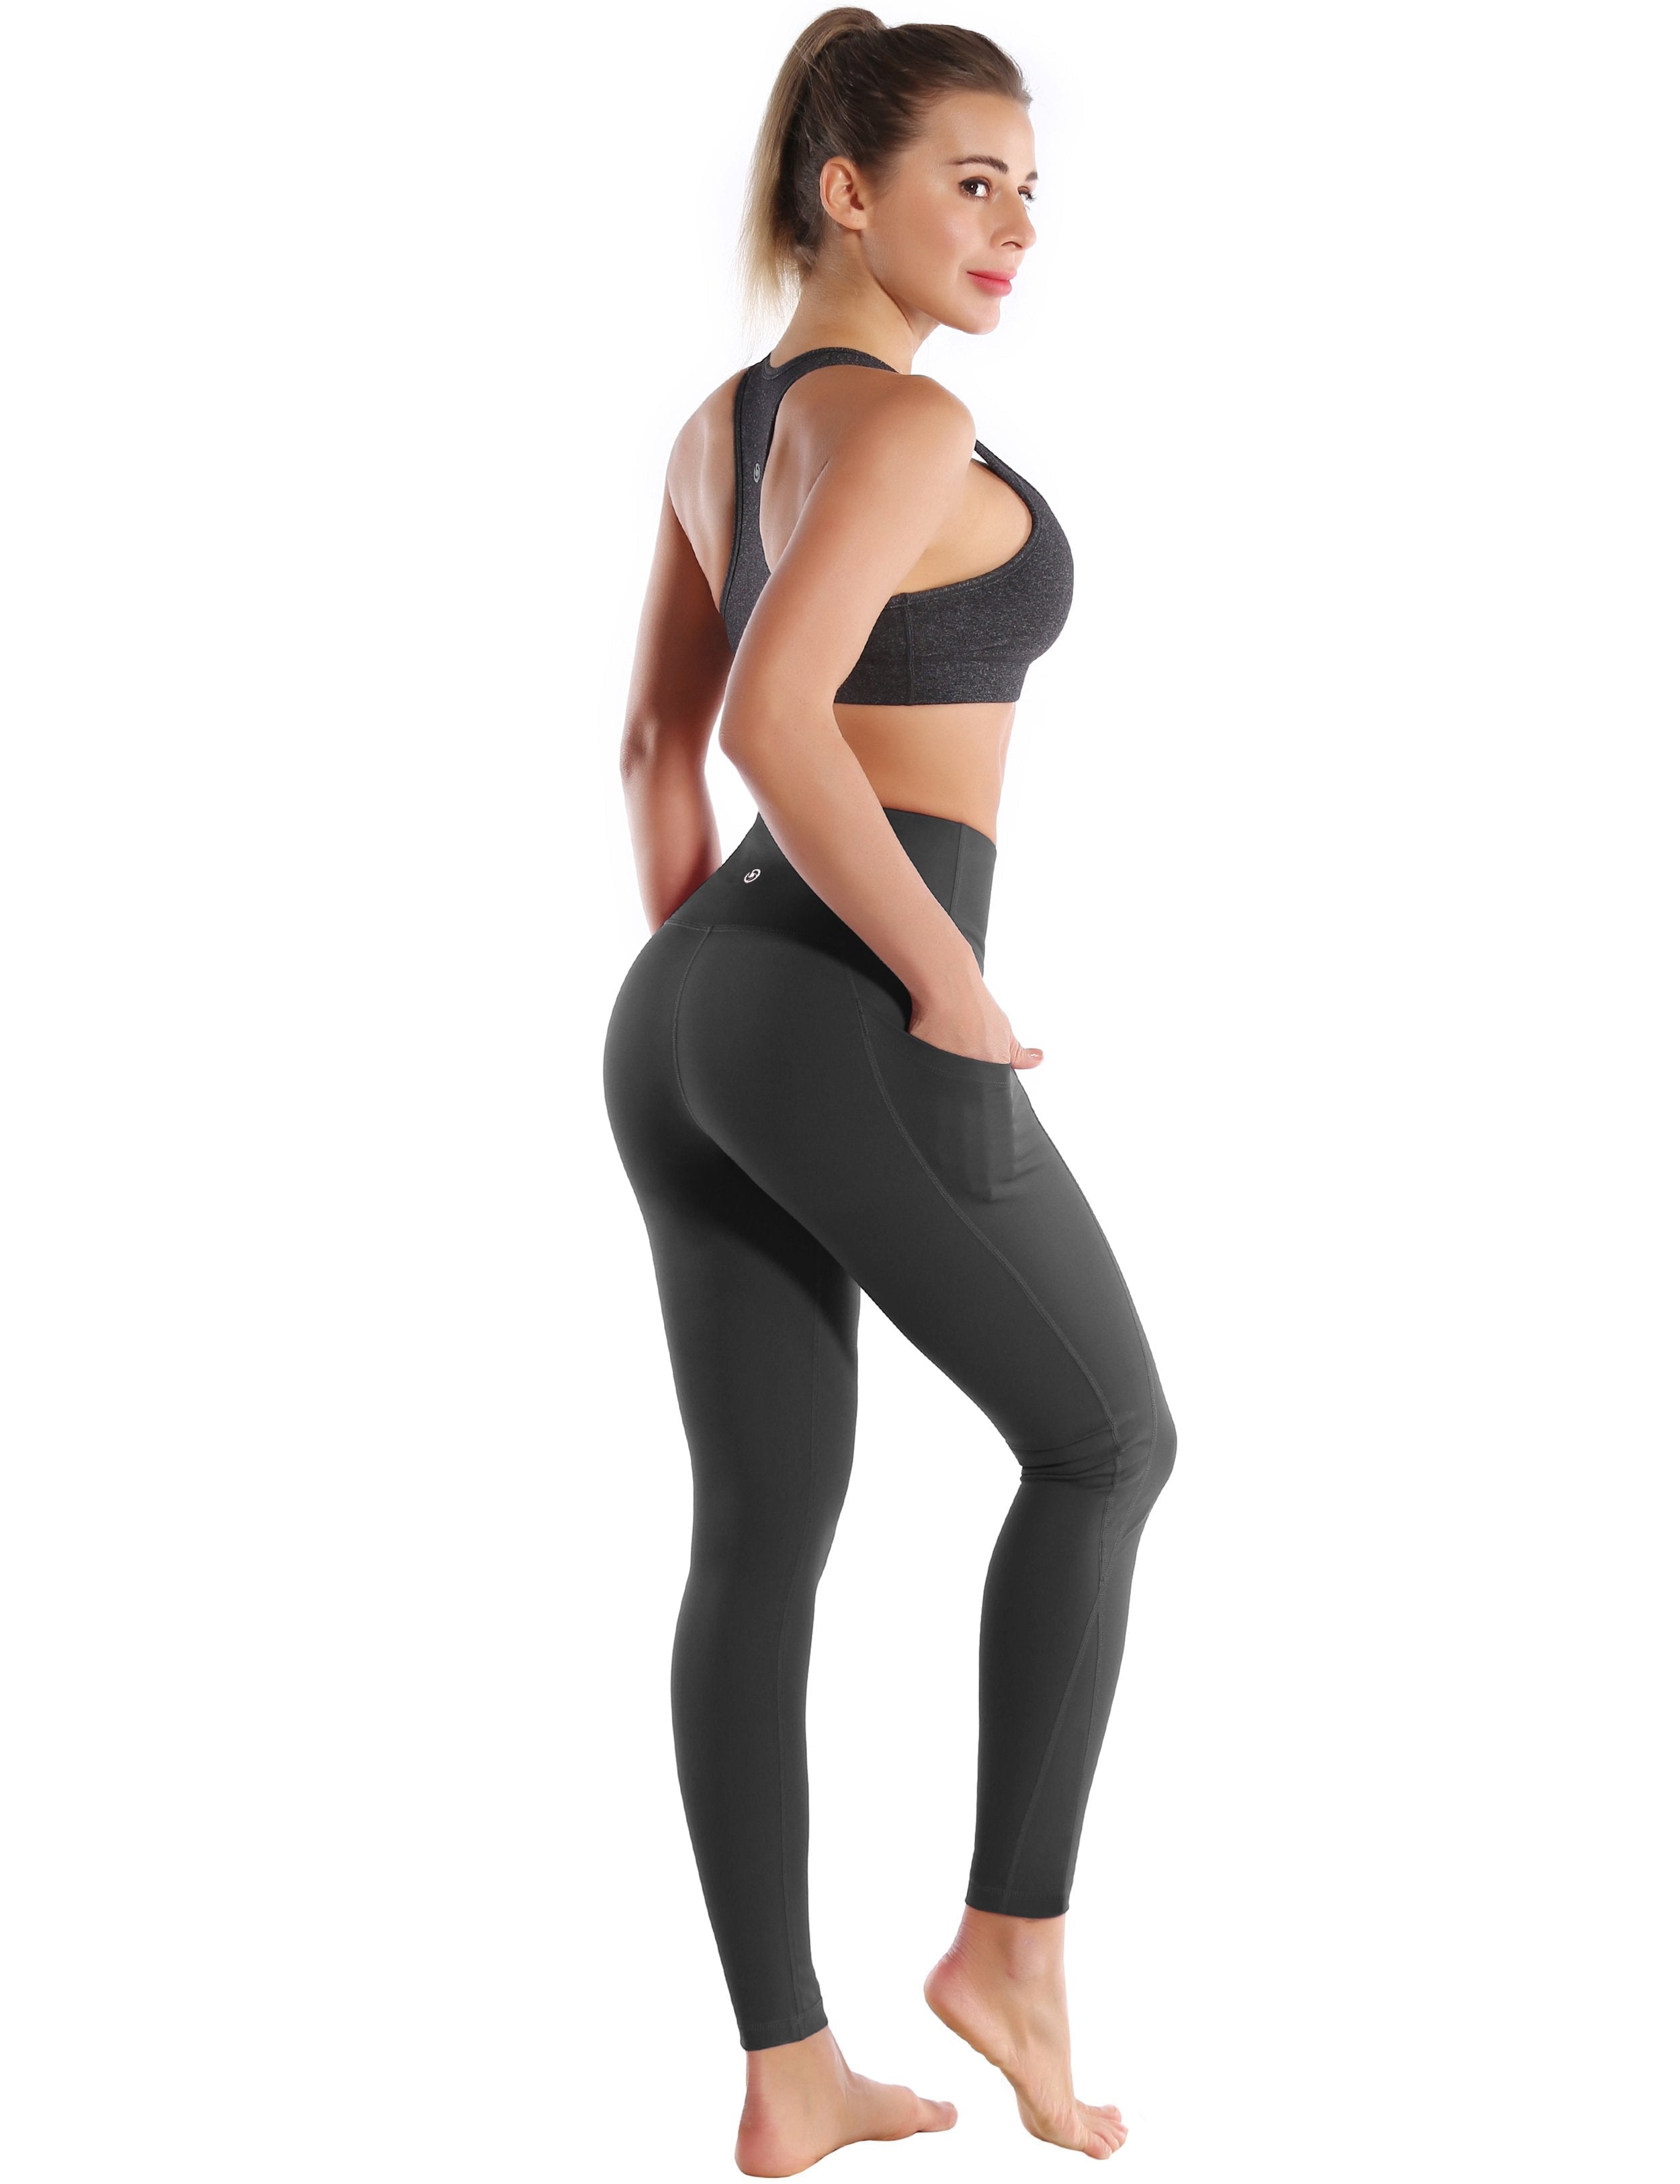 High Waist Side Pockets yogastudio Pants shadowcharcoal 75% Nylon, 25% Spandex Fabric doesn't attract lint easily 4-way stretch No see-through Moisture-wicking Tummy control Inner pocket